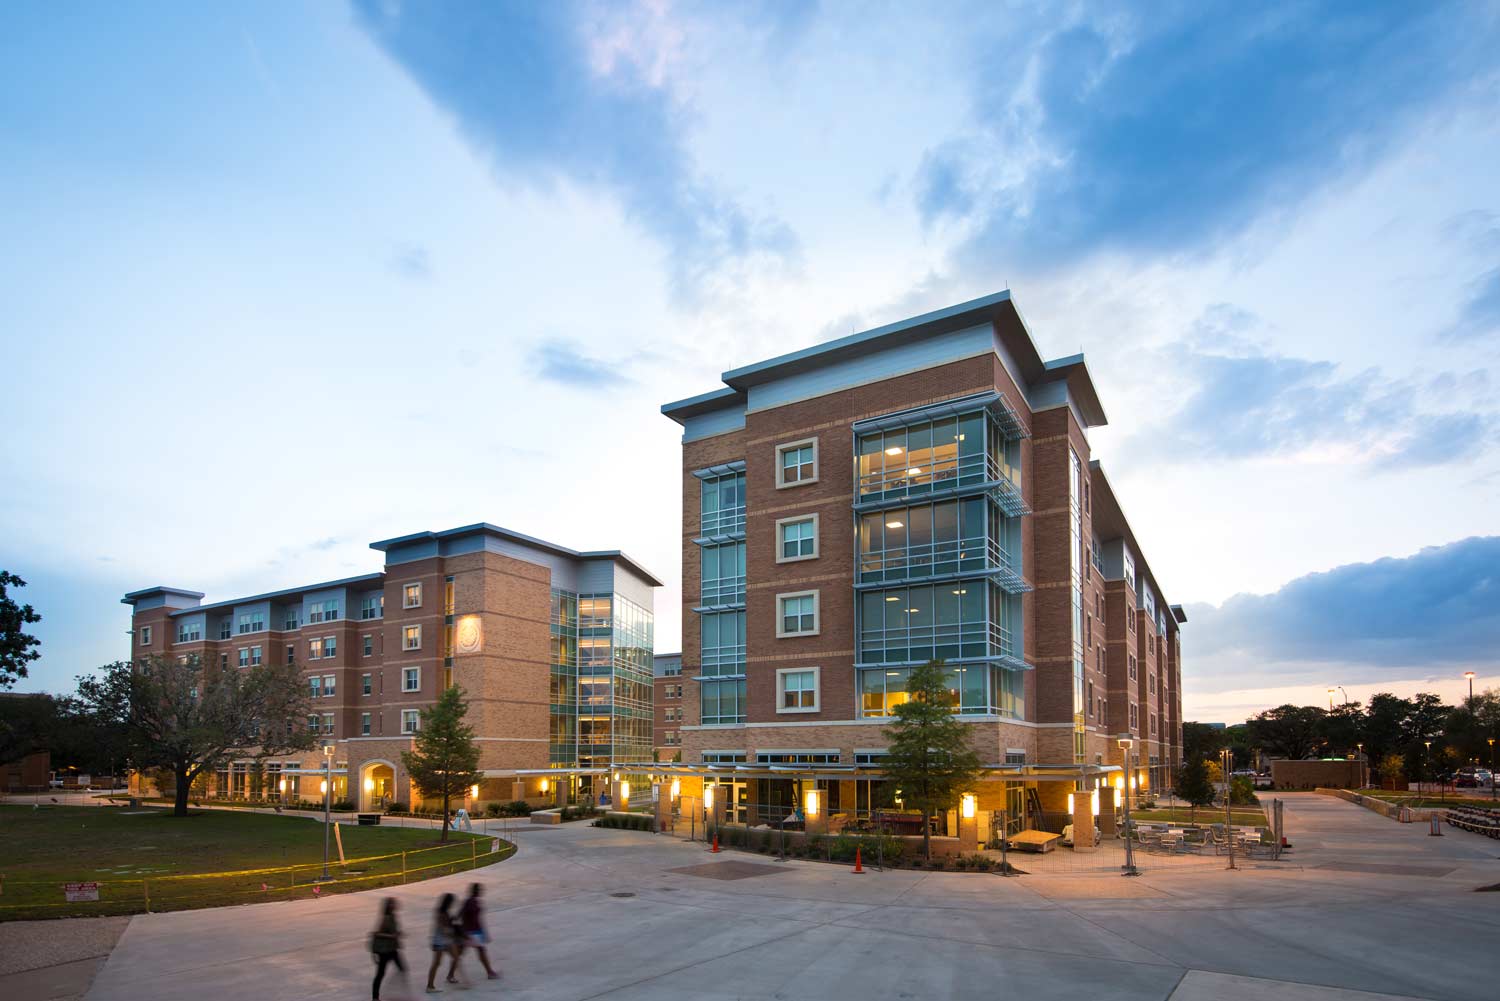 An exterior photo of the Hullabaloo dorms on the north side of campus